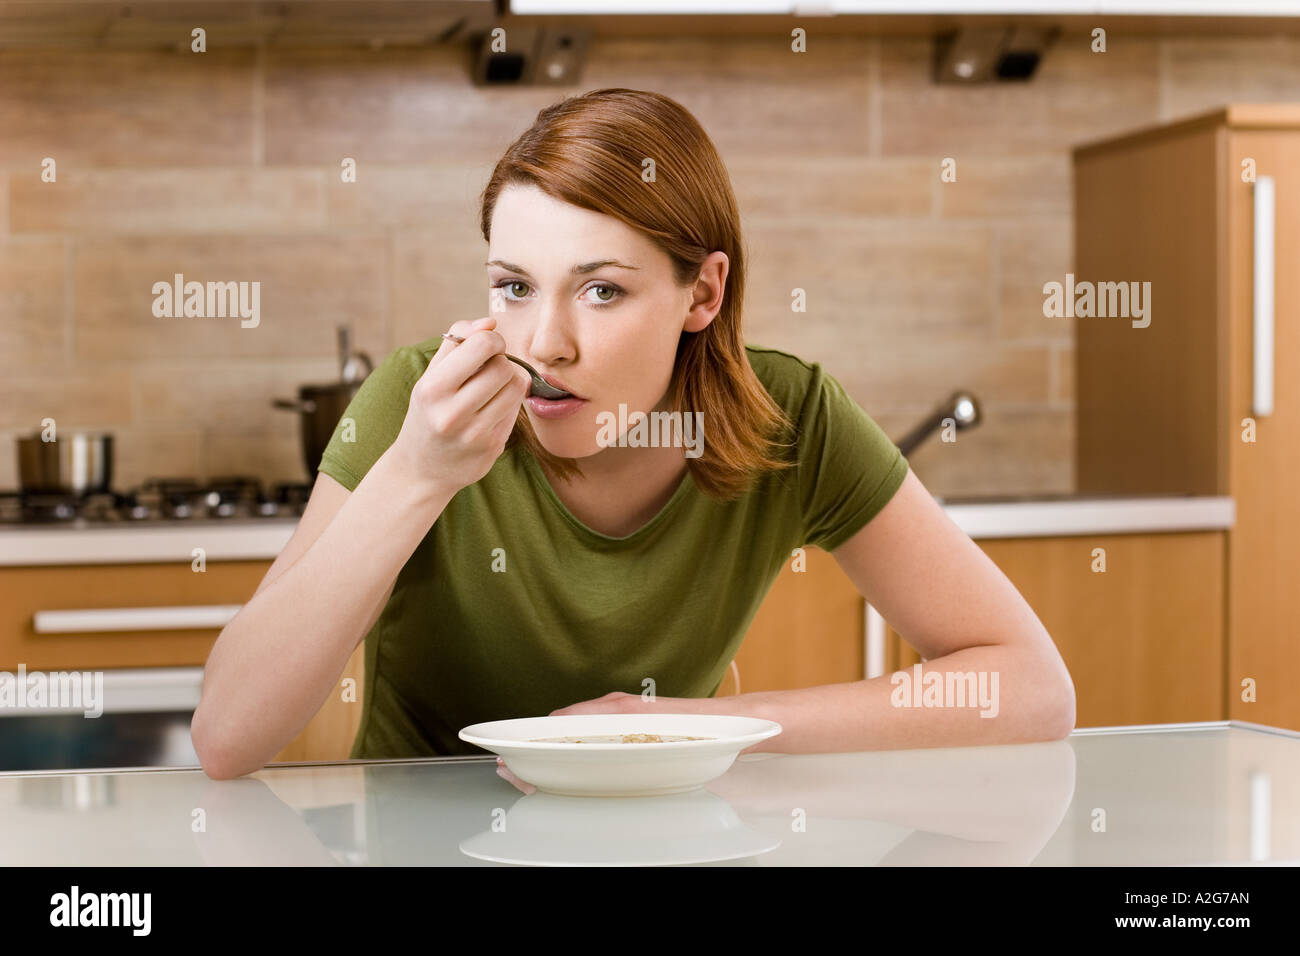 1223879 indoor flat kitchen young woman brunette 25 30 green blouse sit  table hold spoon plate soup meal eat dinner diet Stock Photo - Alamy